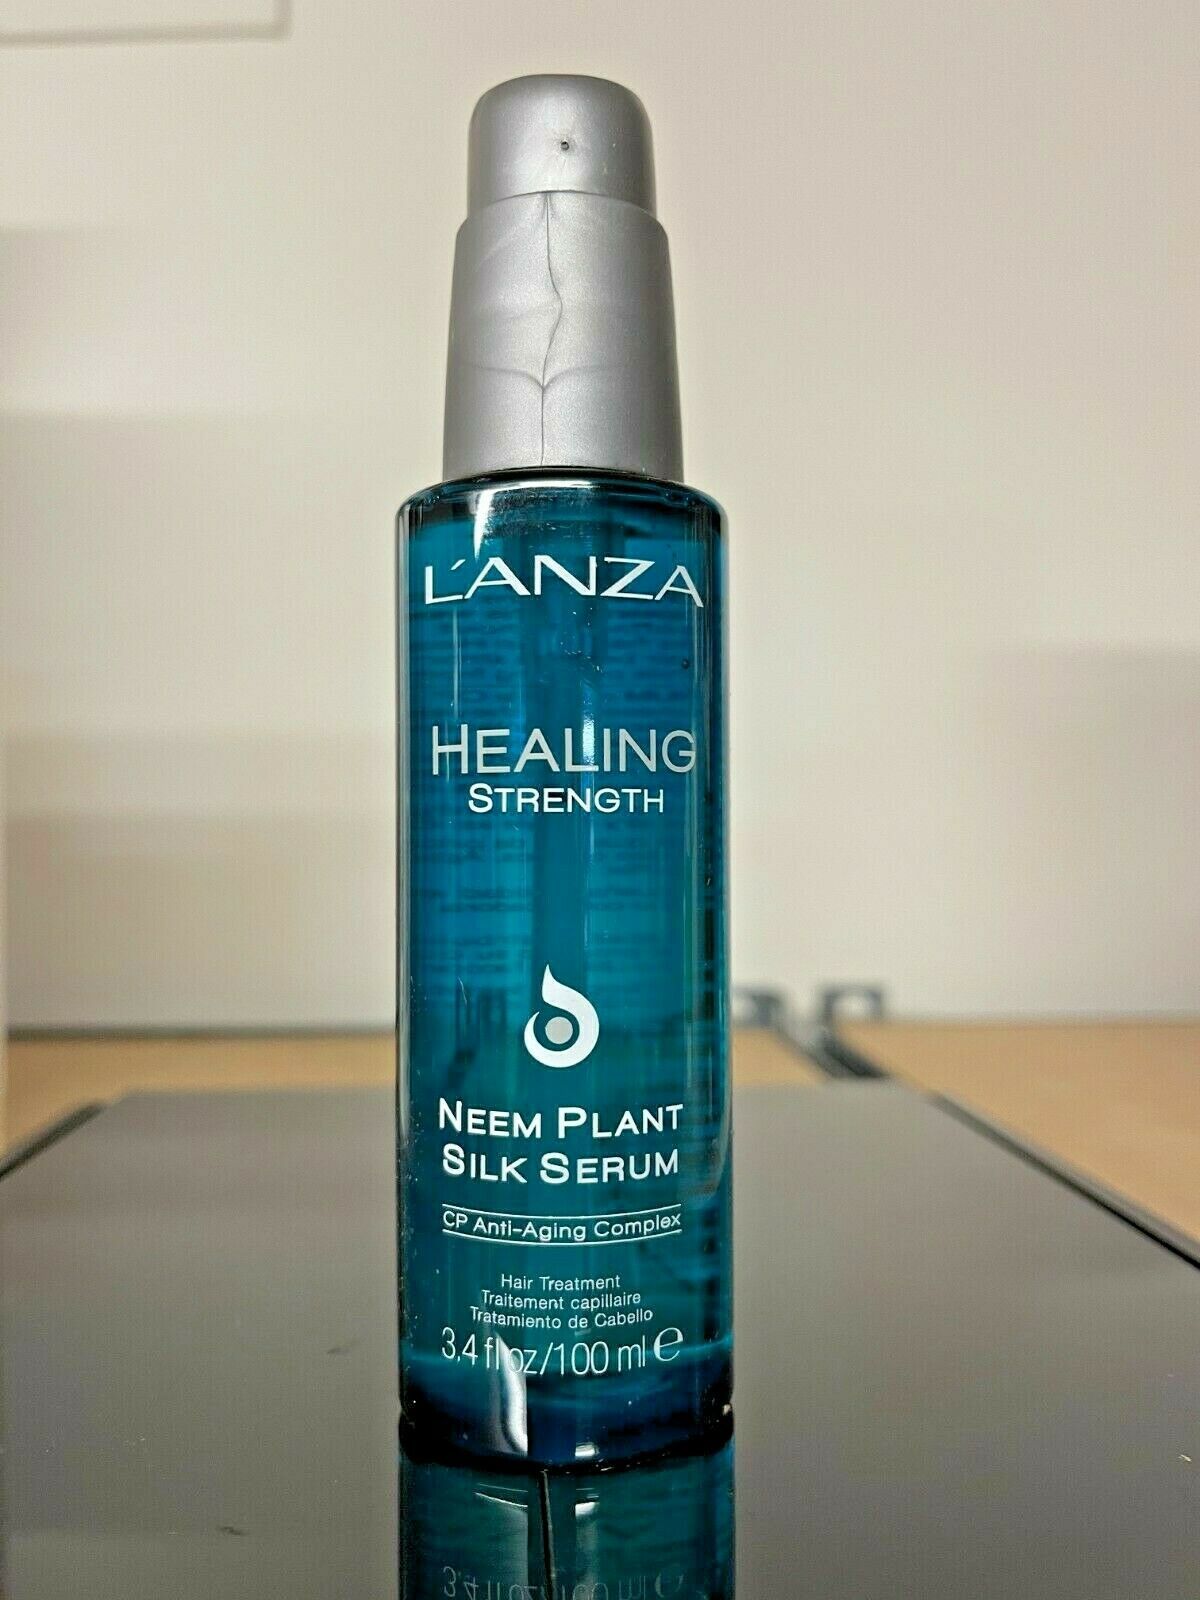 Primary image for Lanza Healing Strength Neem Plant Silk Serum 3.4oz - SAME DAY SHIPPING!